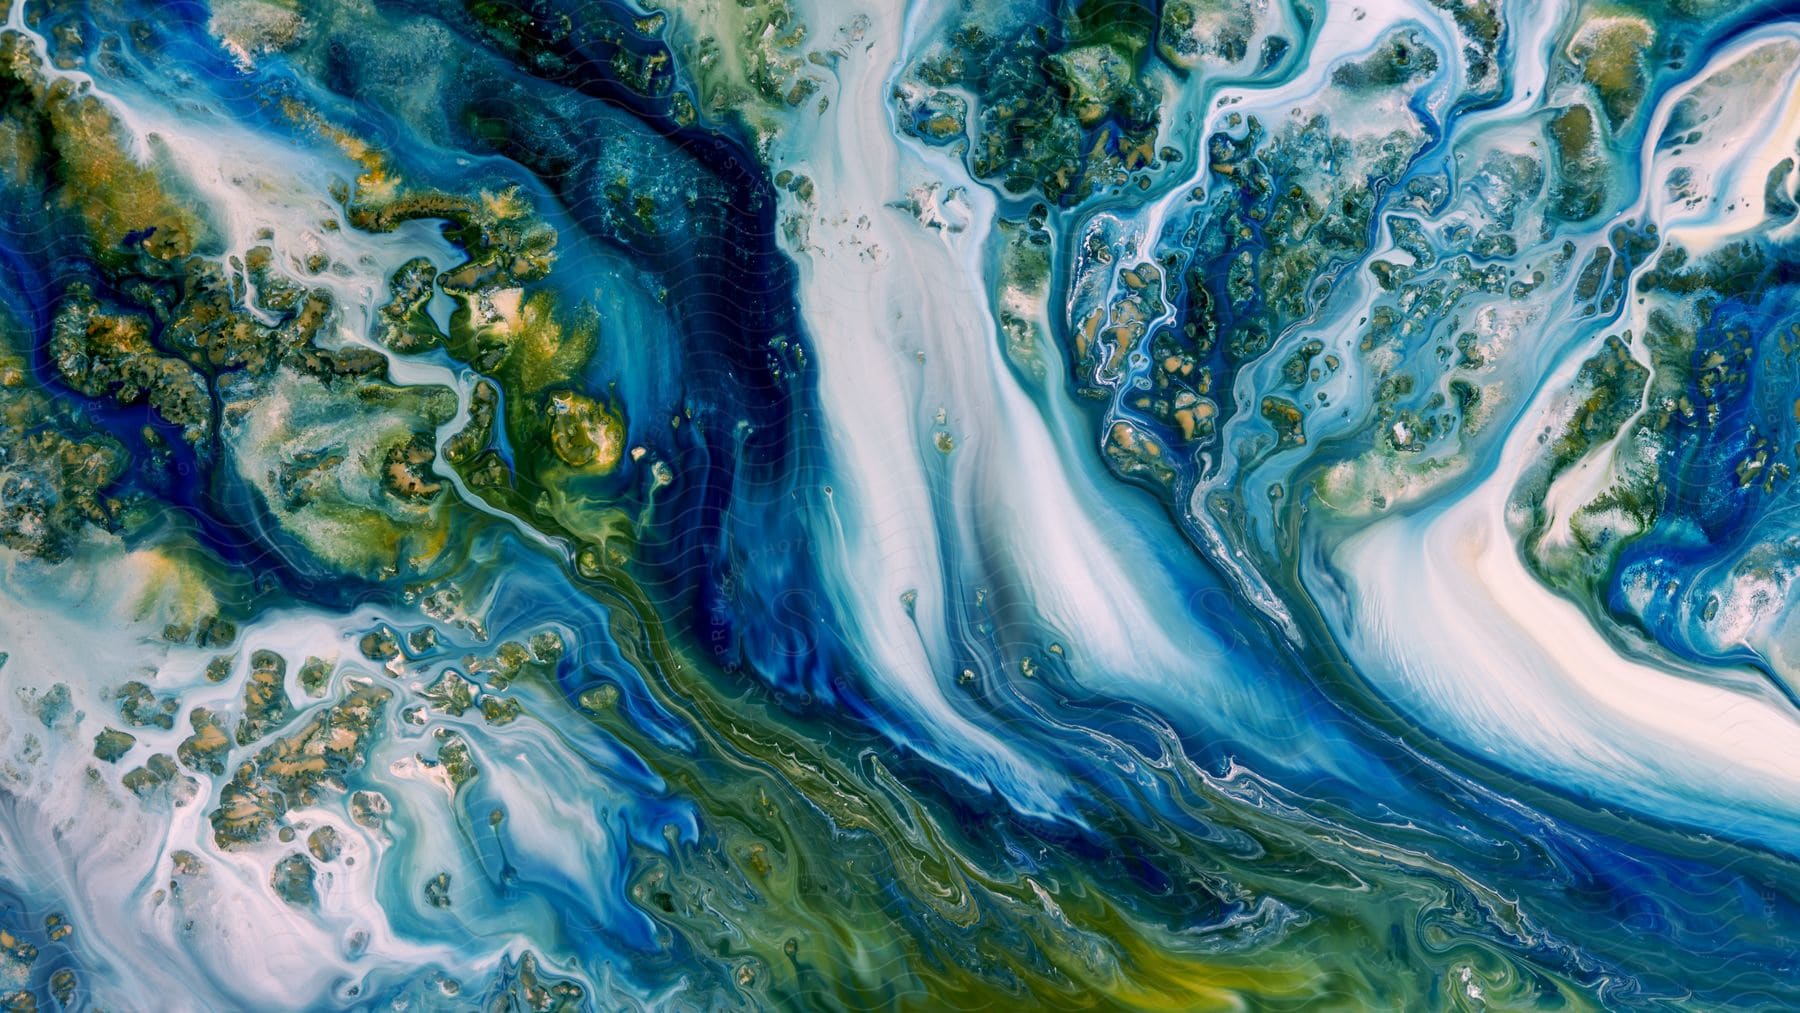 Abstract acrylic painting with blue background white and green liquid swirls